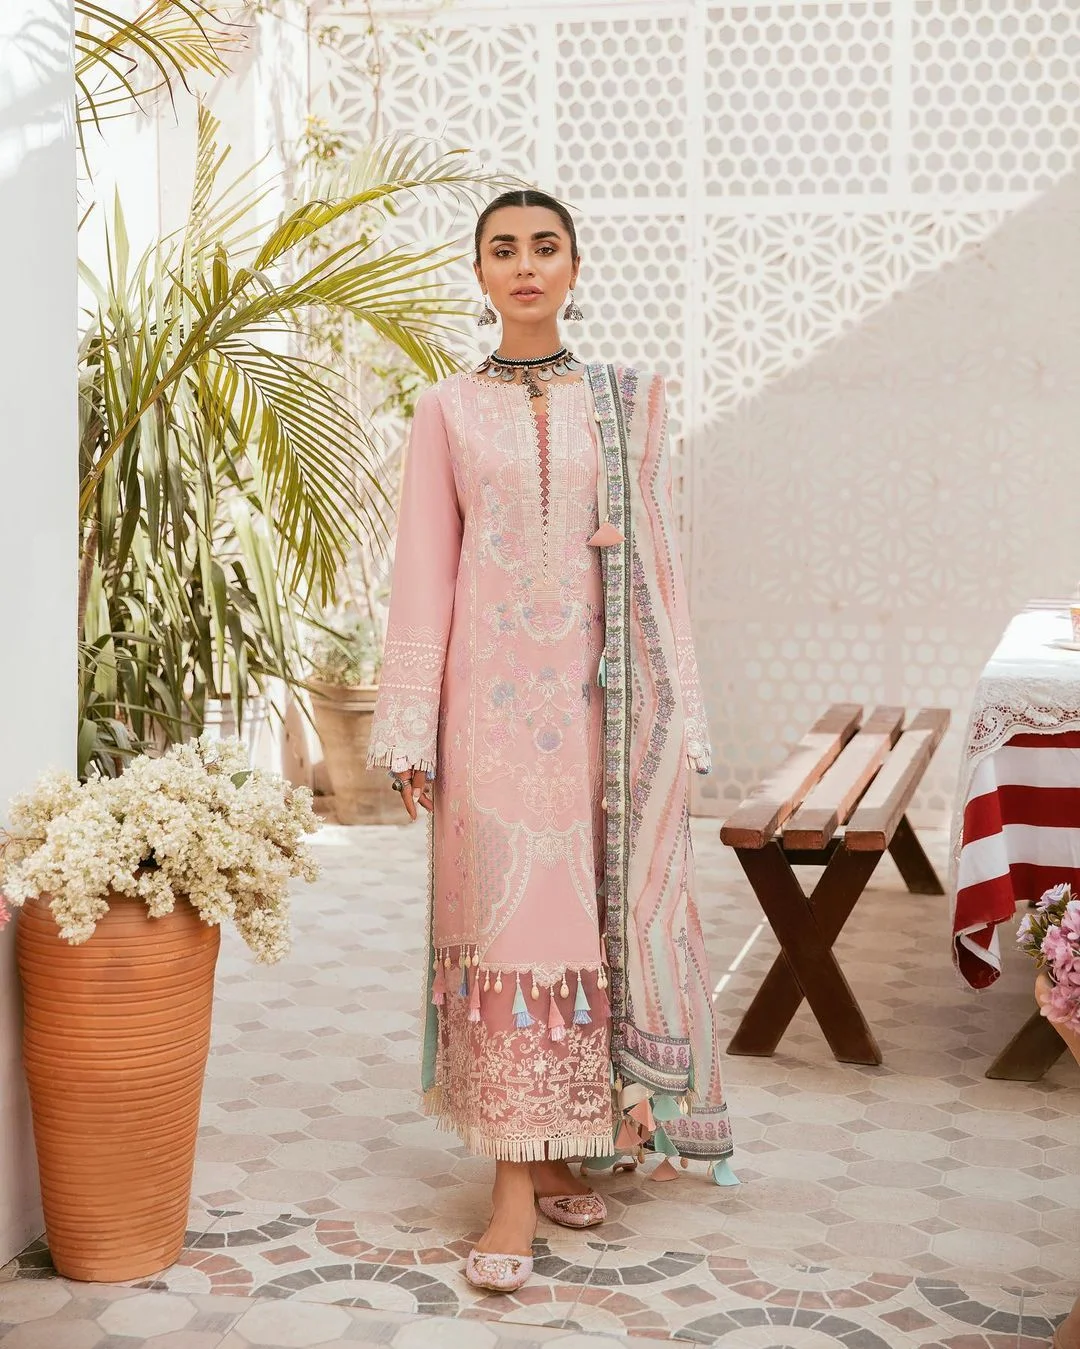 Asifa Nabeel launched “Qaus e Quzah” Lawn